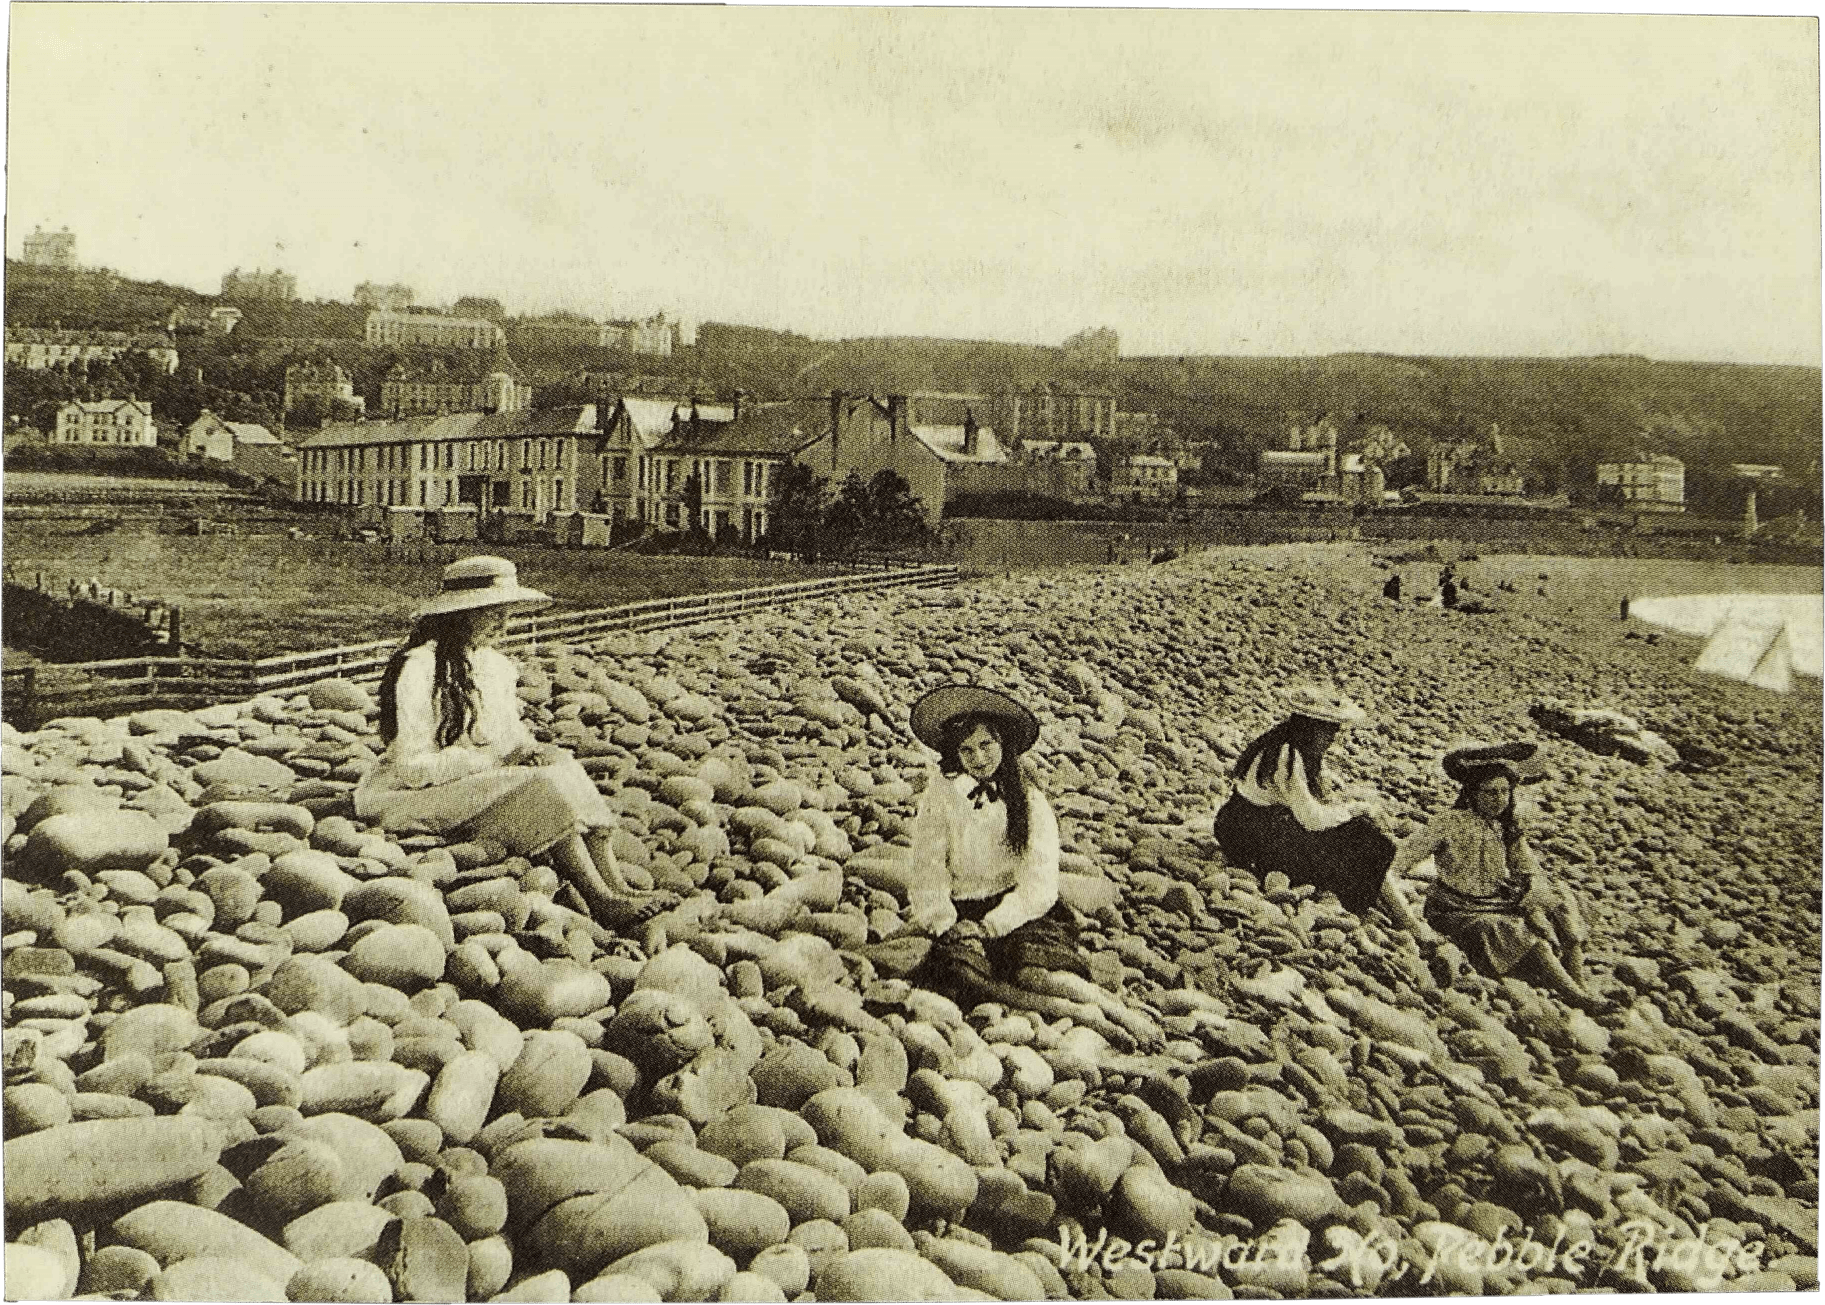 An old photograph of four women and girls sitting on a pebble beach